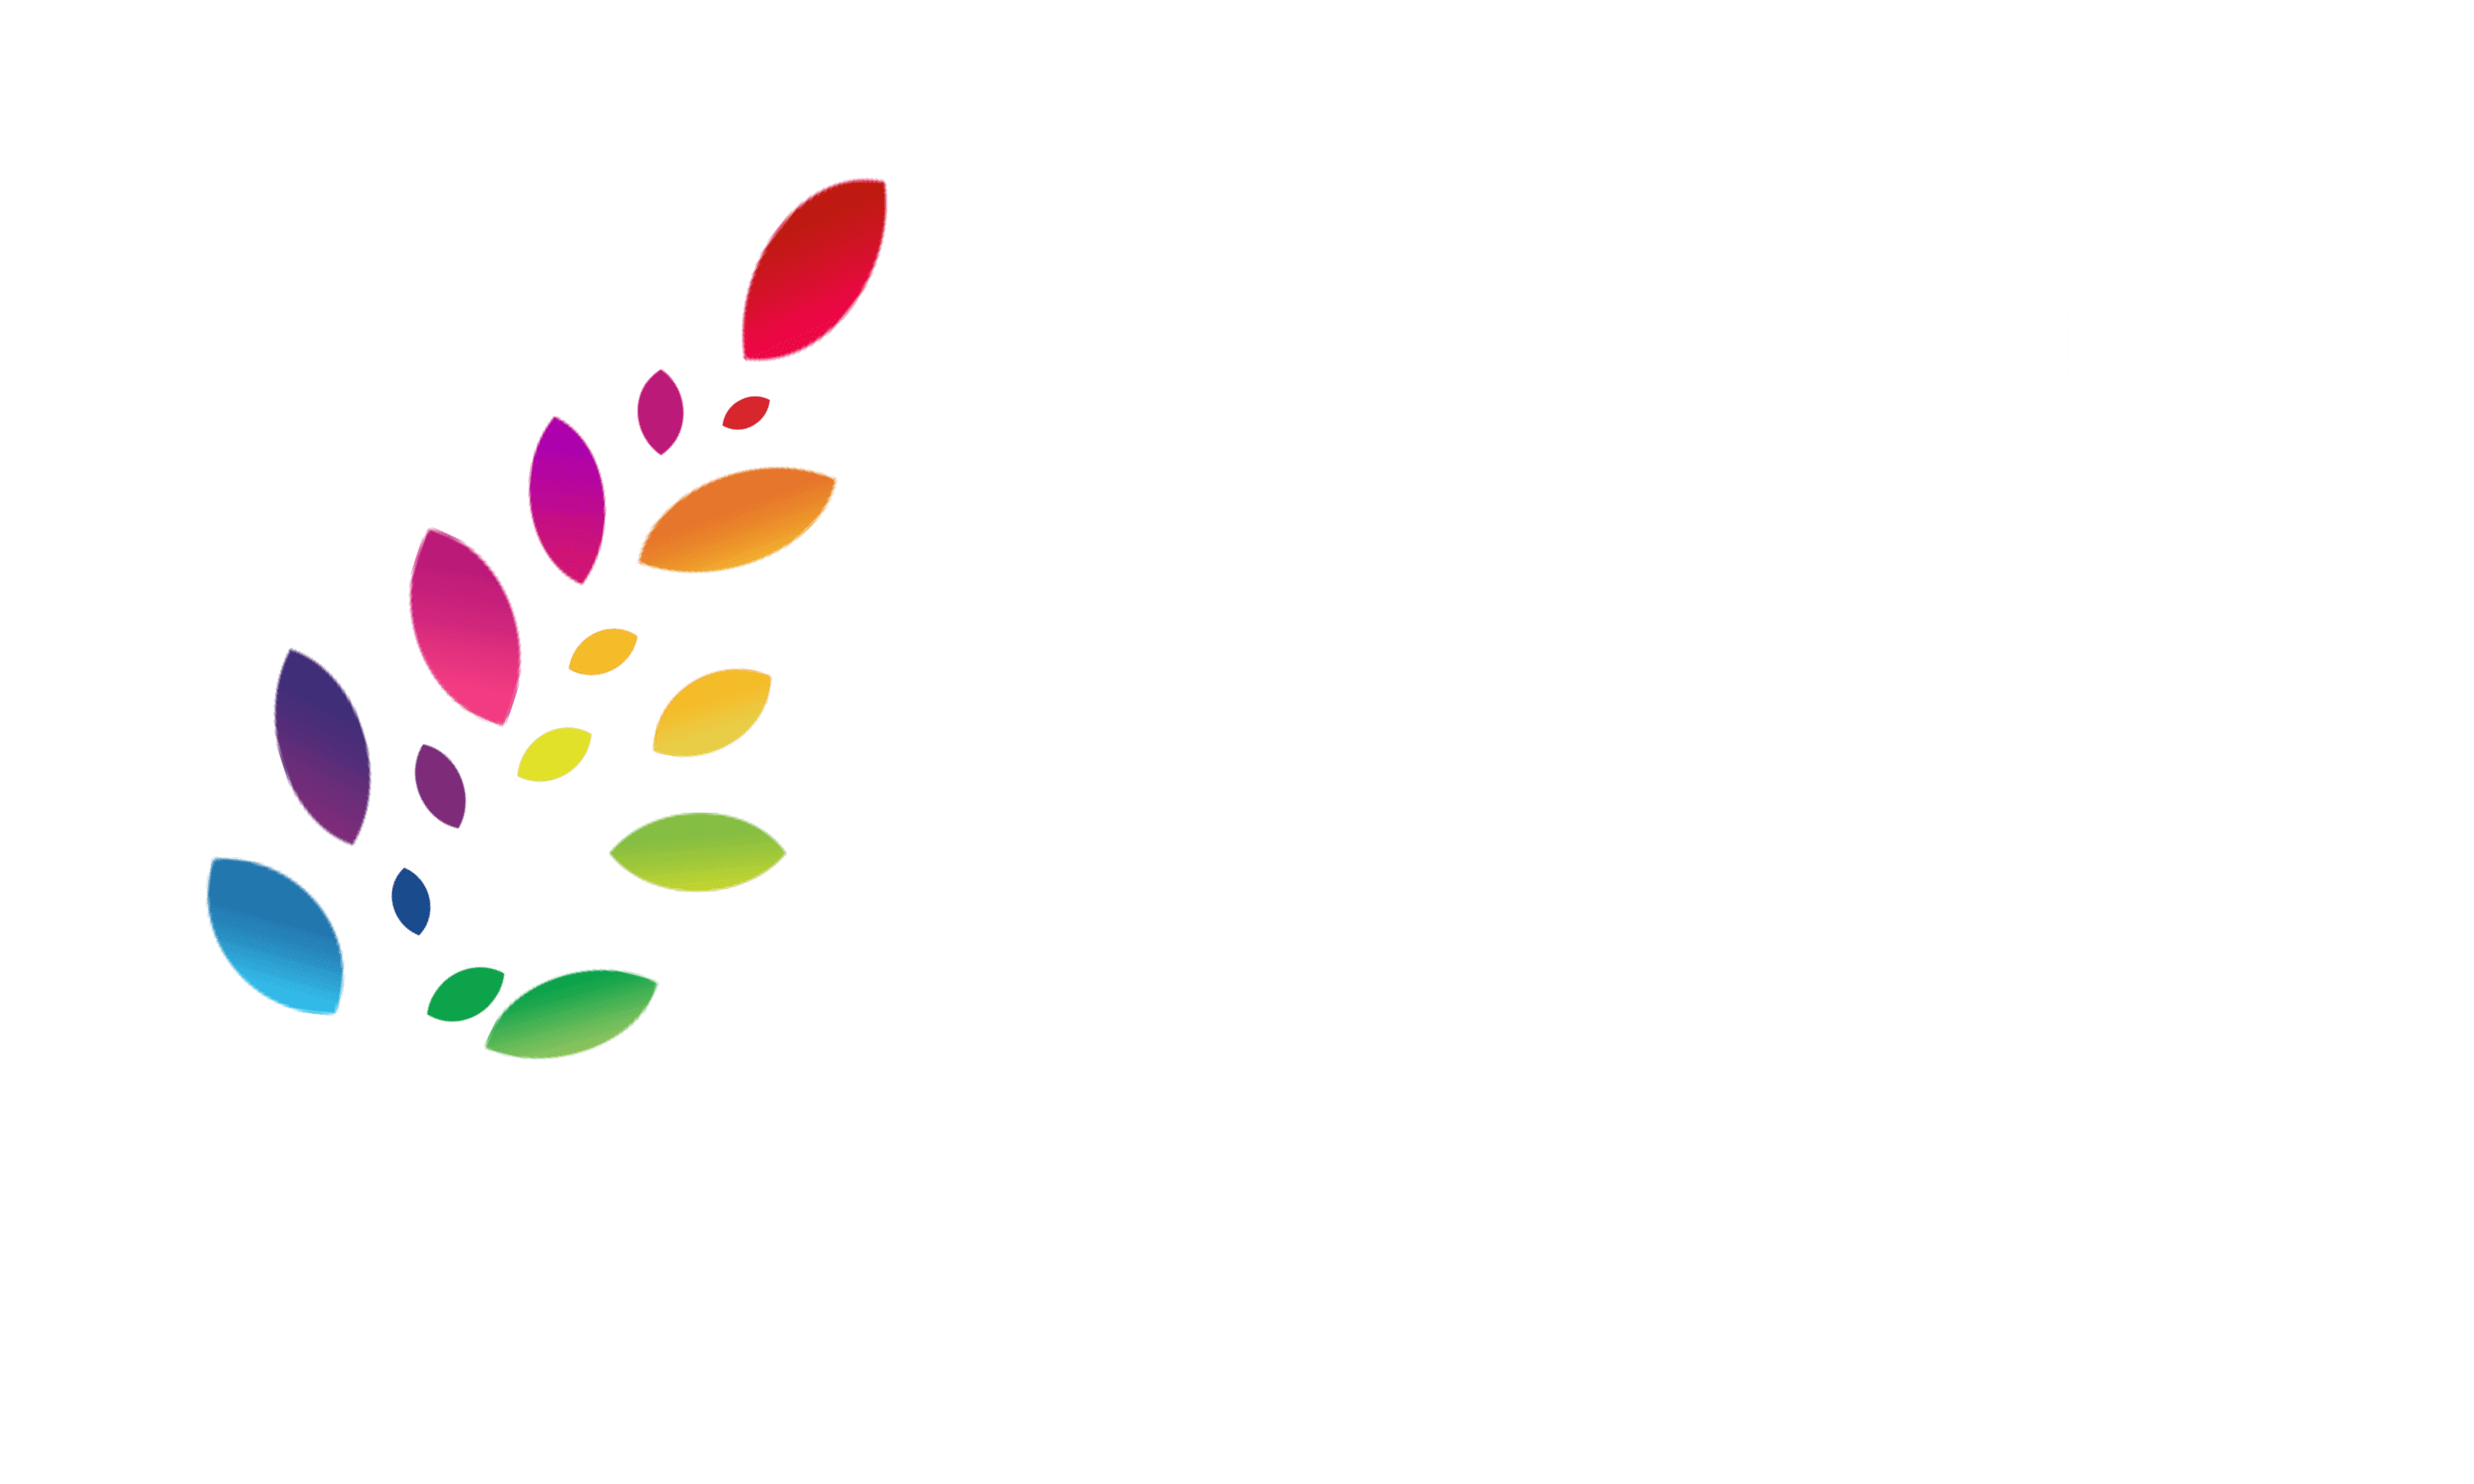 The Institute for Arts Integration and STEAM